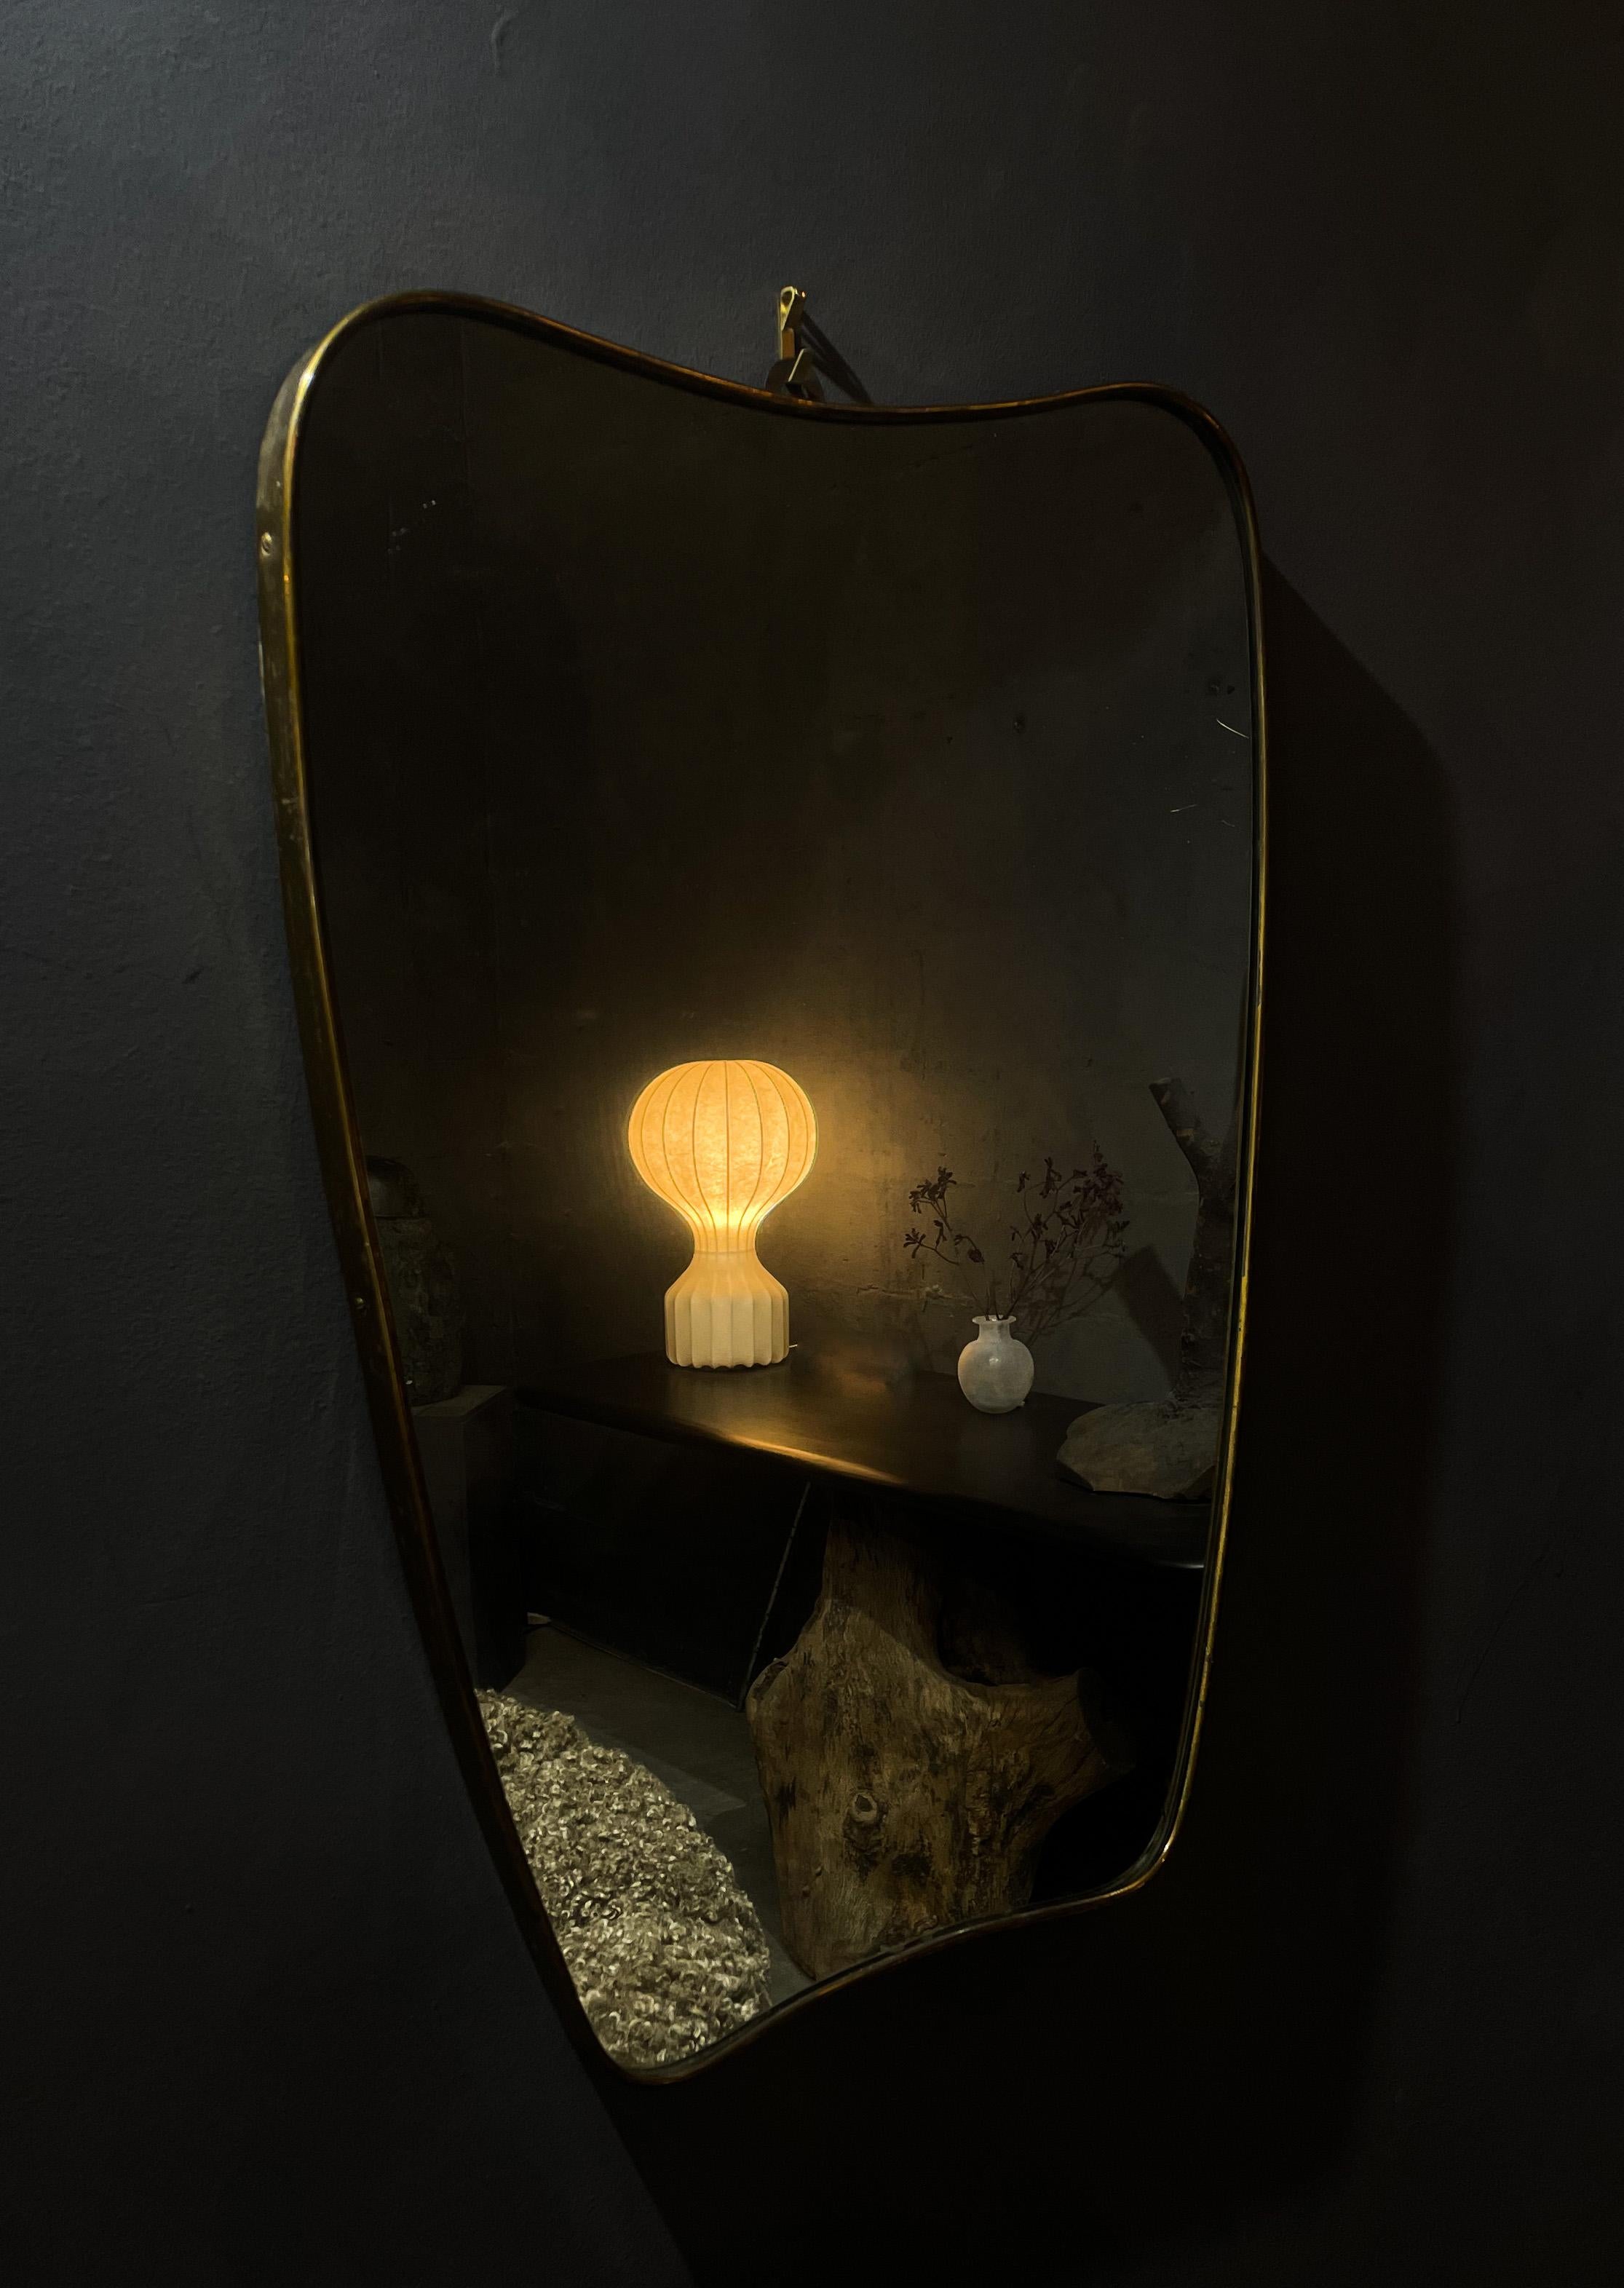 This gorgeous solid brass mirror in the manner of Gio Ponti was made in Italy in the 1950s. Wear consistent with age- patina around the brass. Overall good condition. Glass has been replaced. A stunning timeless shape and design. Original glass. See